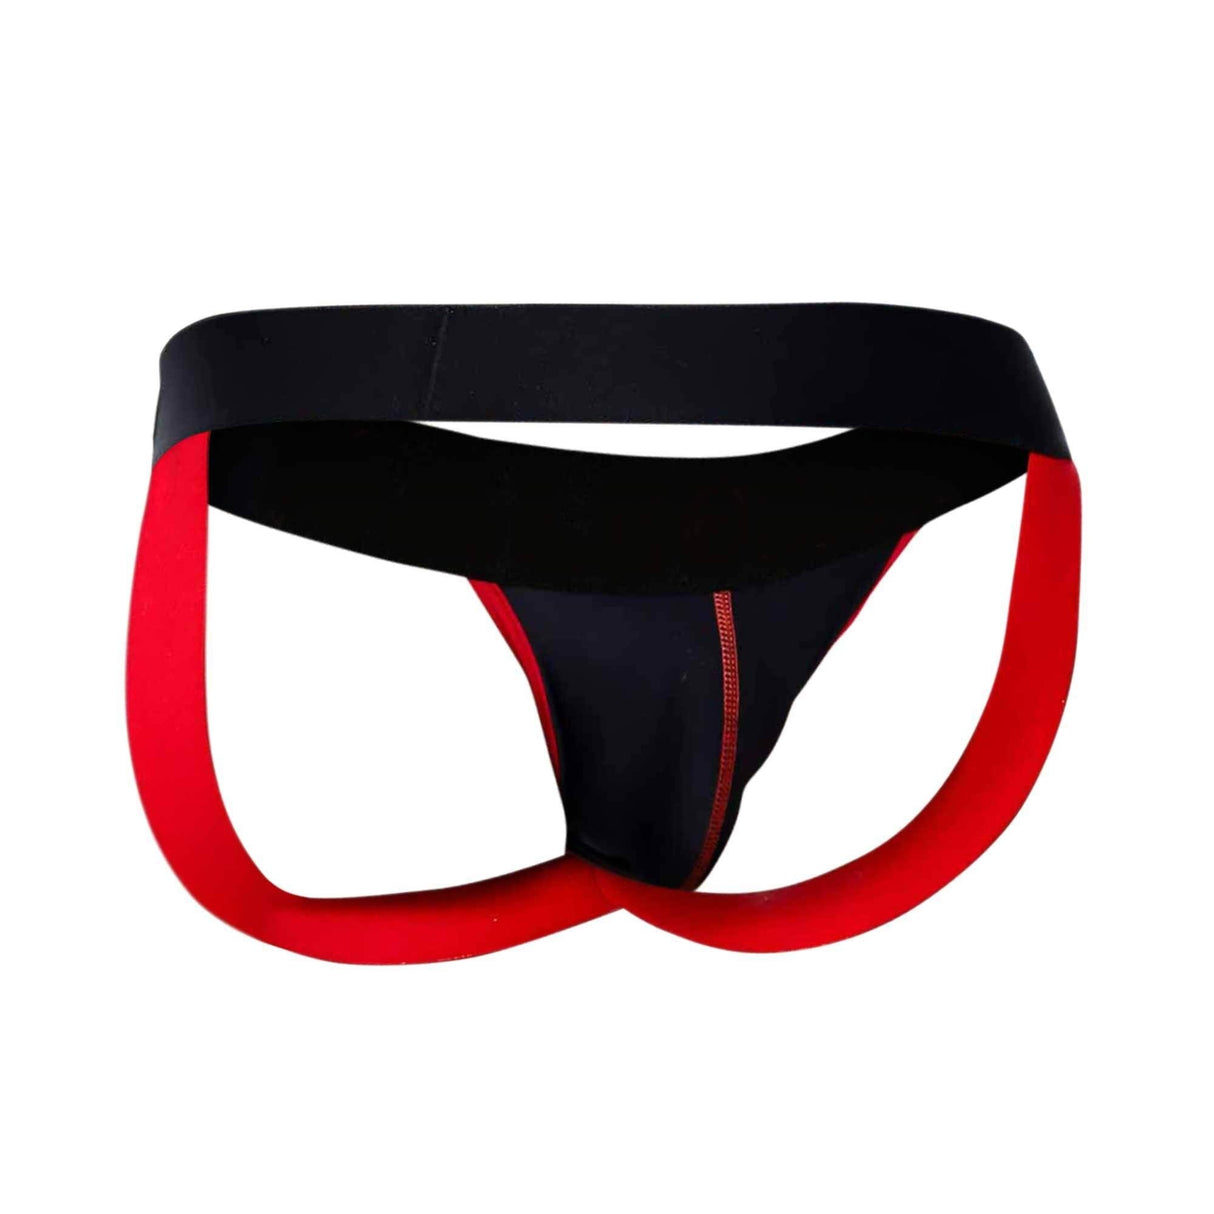 Mb Neon Jock Red Xl Intimates Adult Boutique